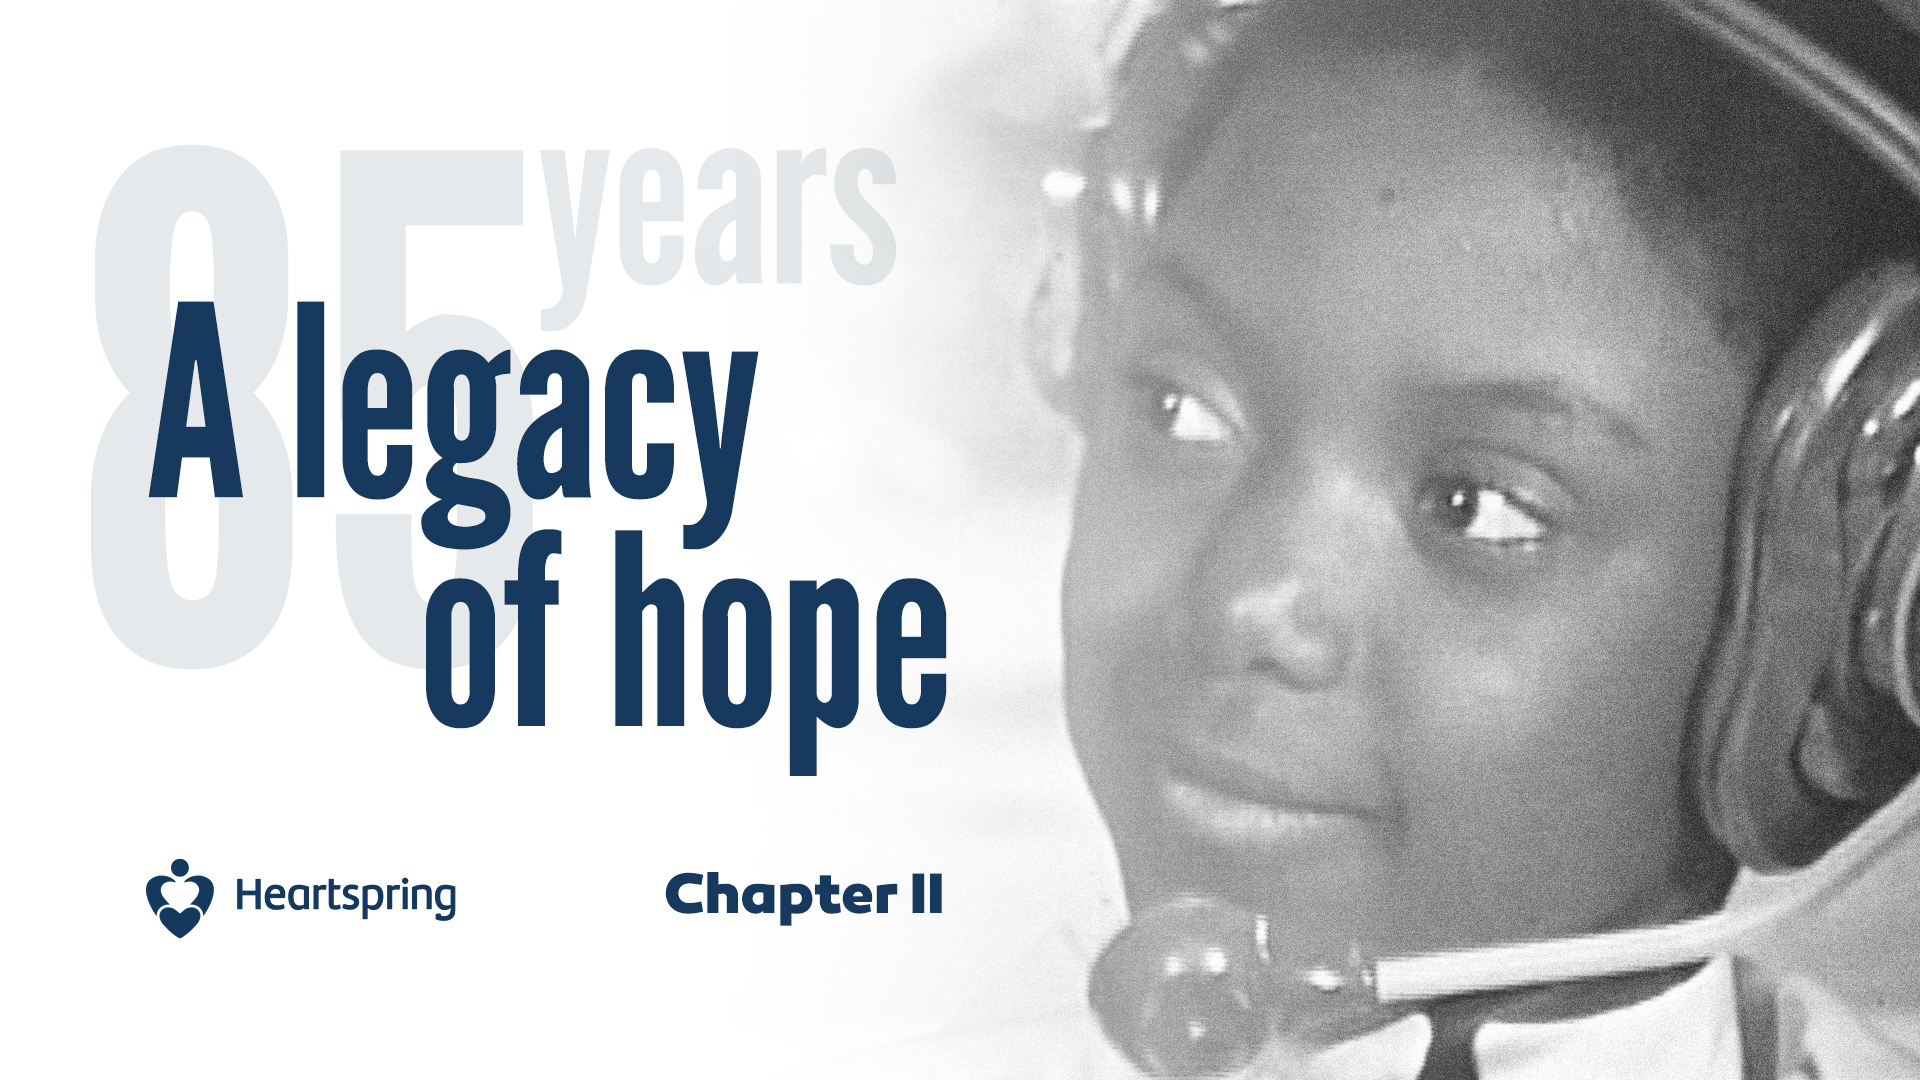 Chapter II: 85 Years A Legacy of Hope